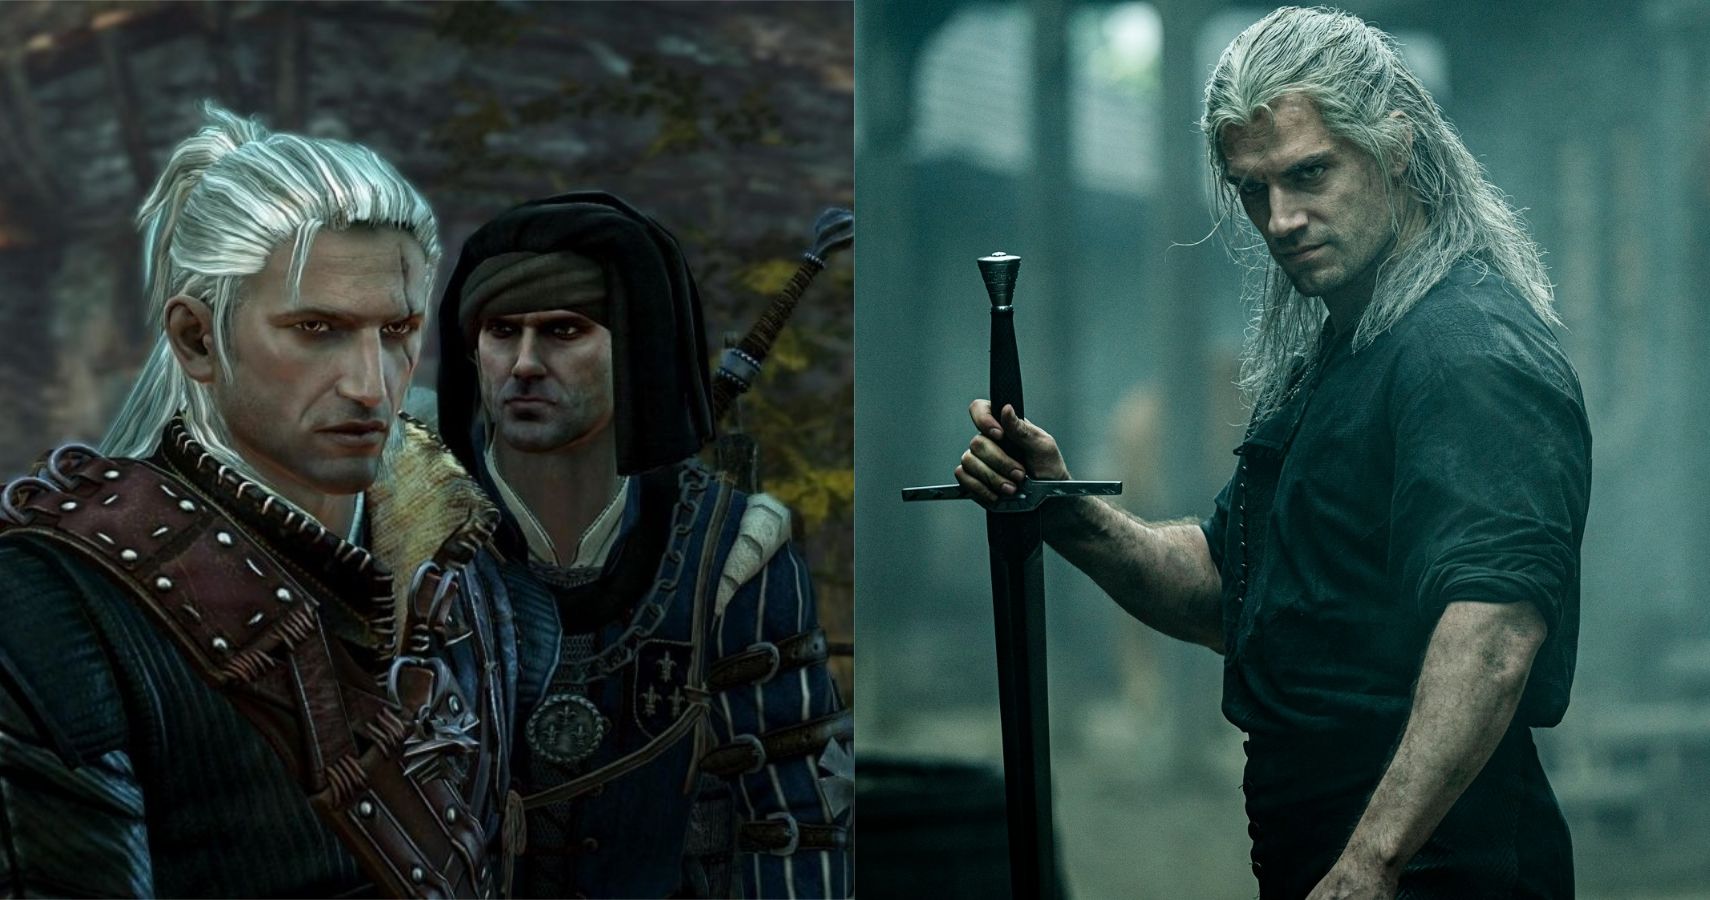 the witcher 2 characters